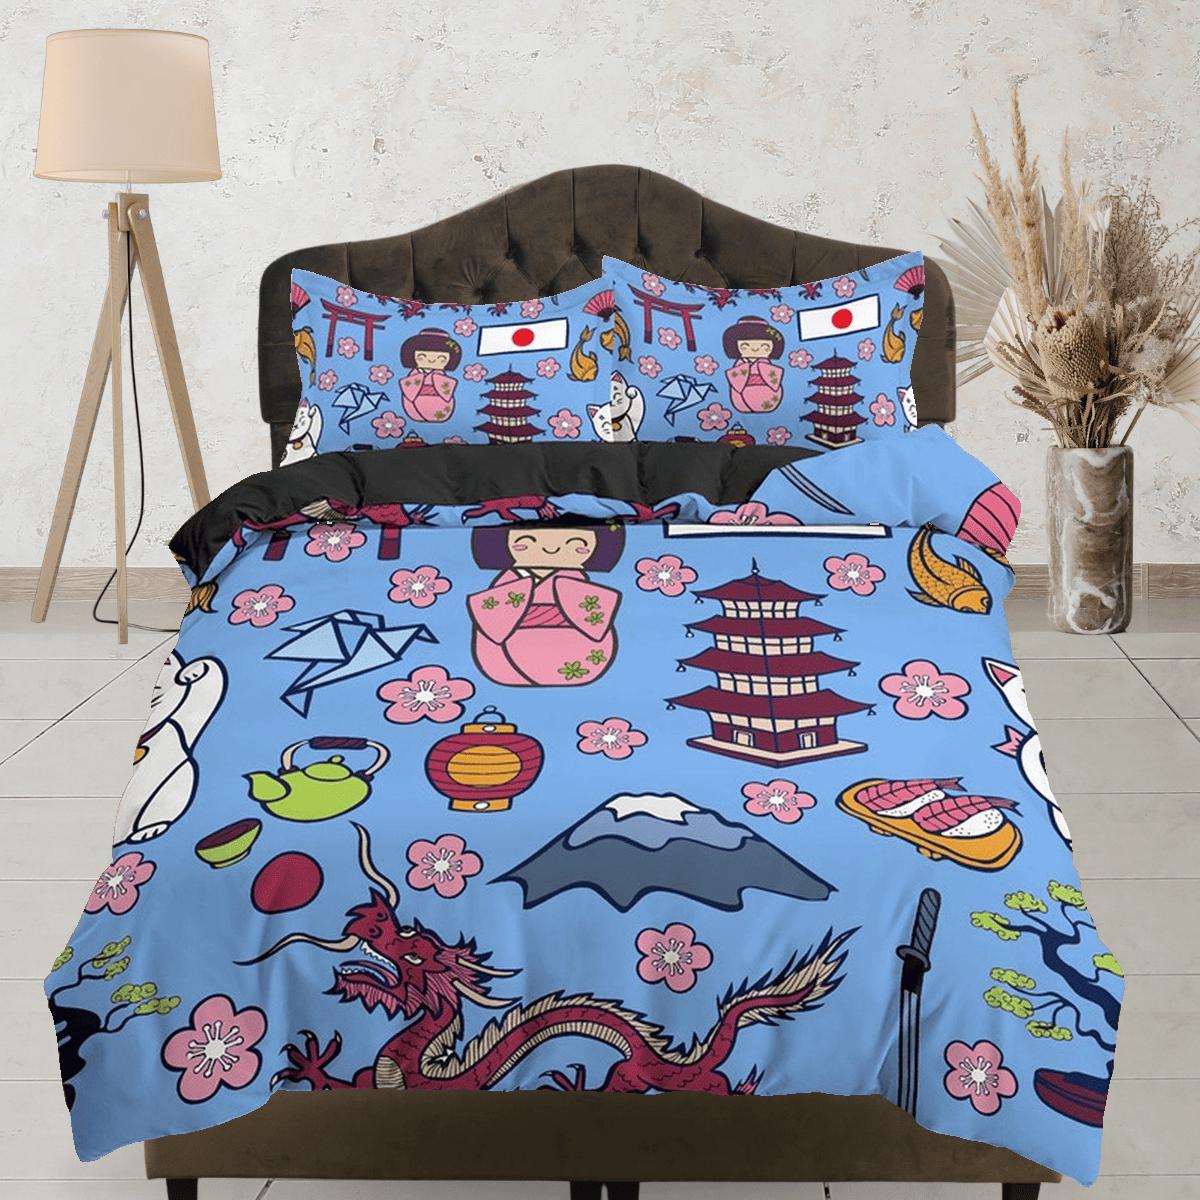 daintyduvet Cute oriental blue bedding for kids, japan culture, kimono and dragon, japanese duvet cover set for king, queen, full, twin, toddler bed